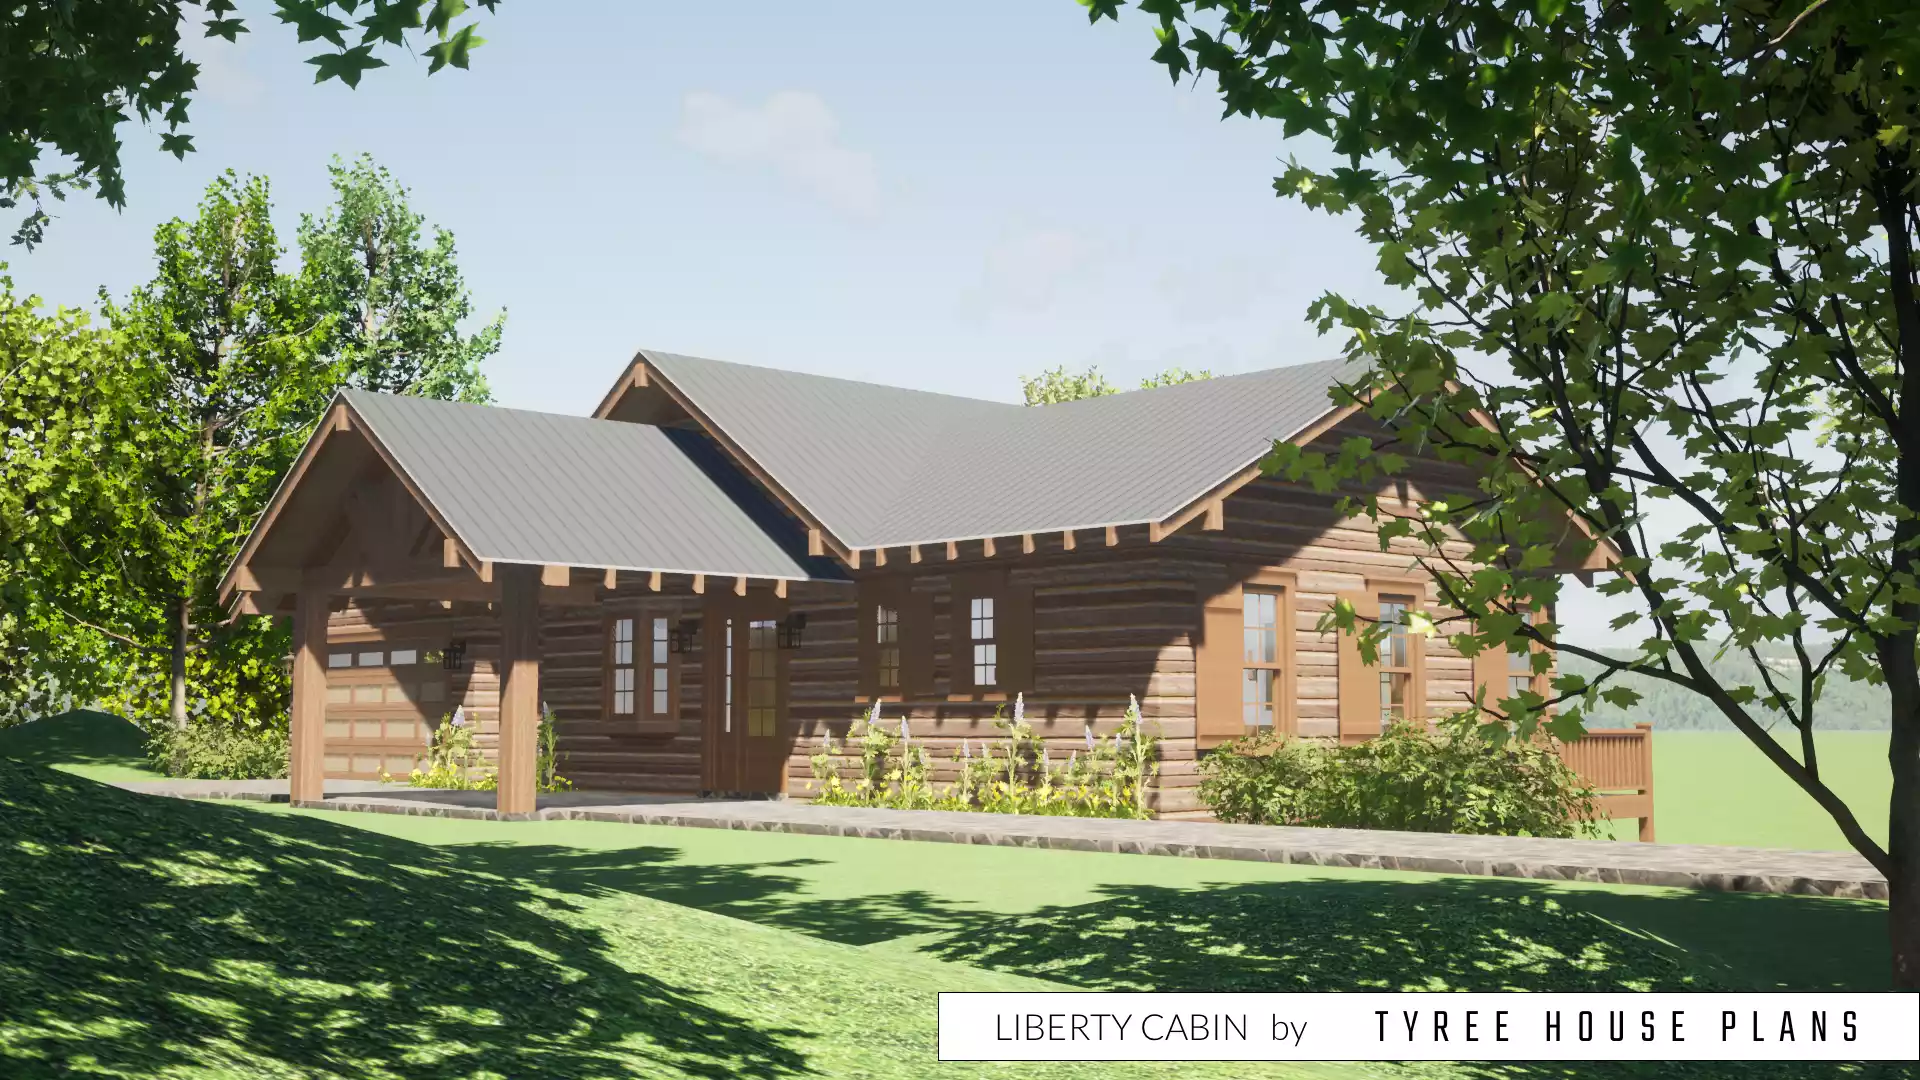 Covered drive at the front of the house. Liberty Cabin by Tyree House Plans.